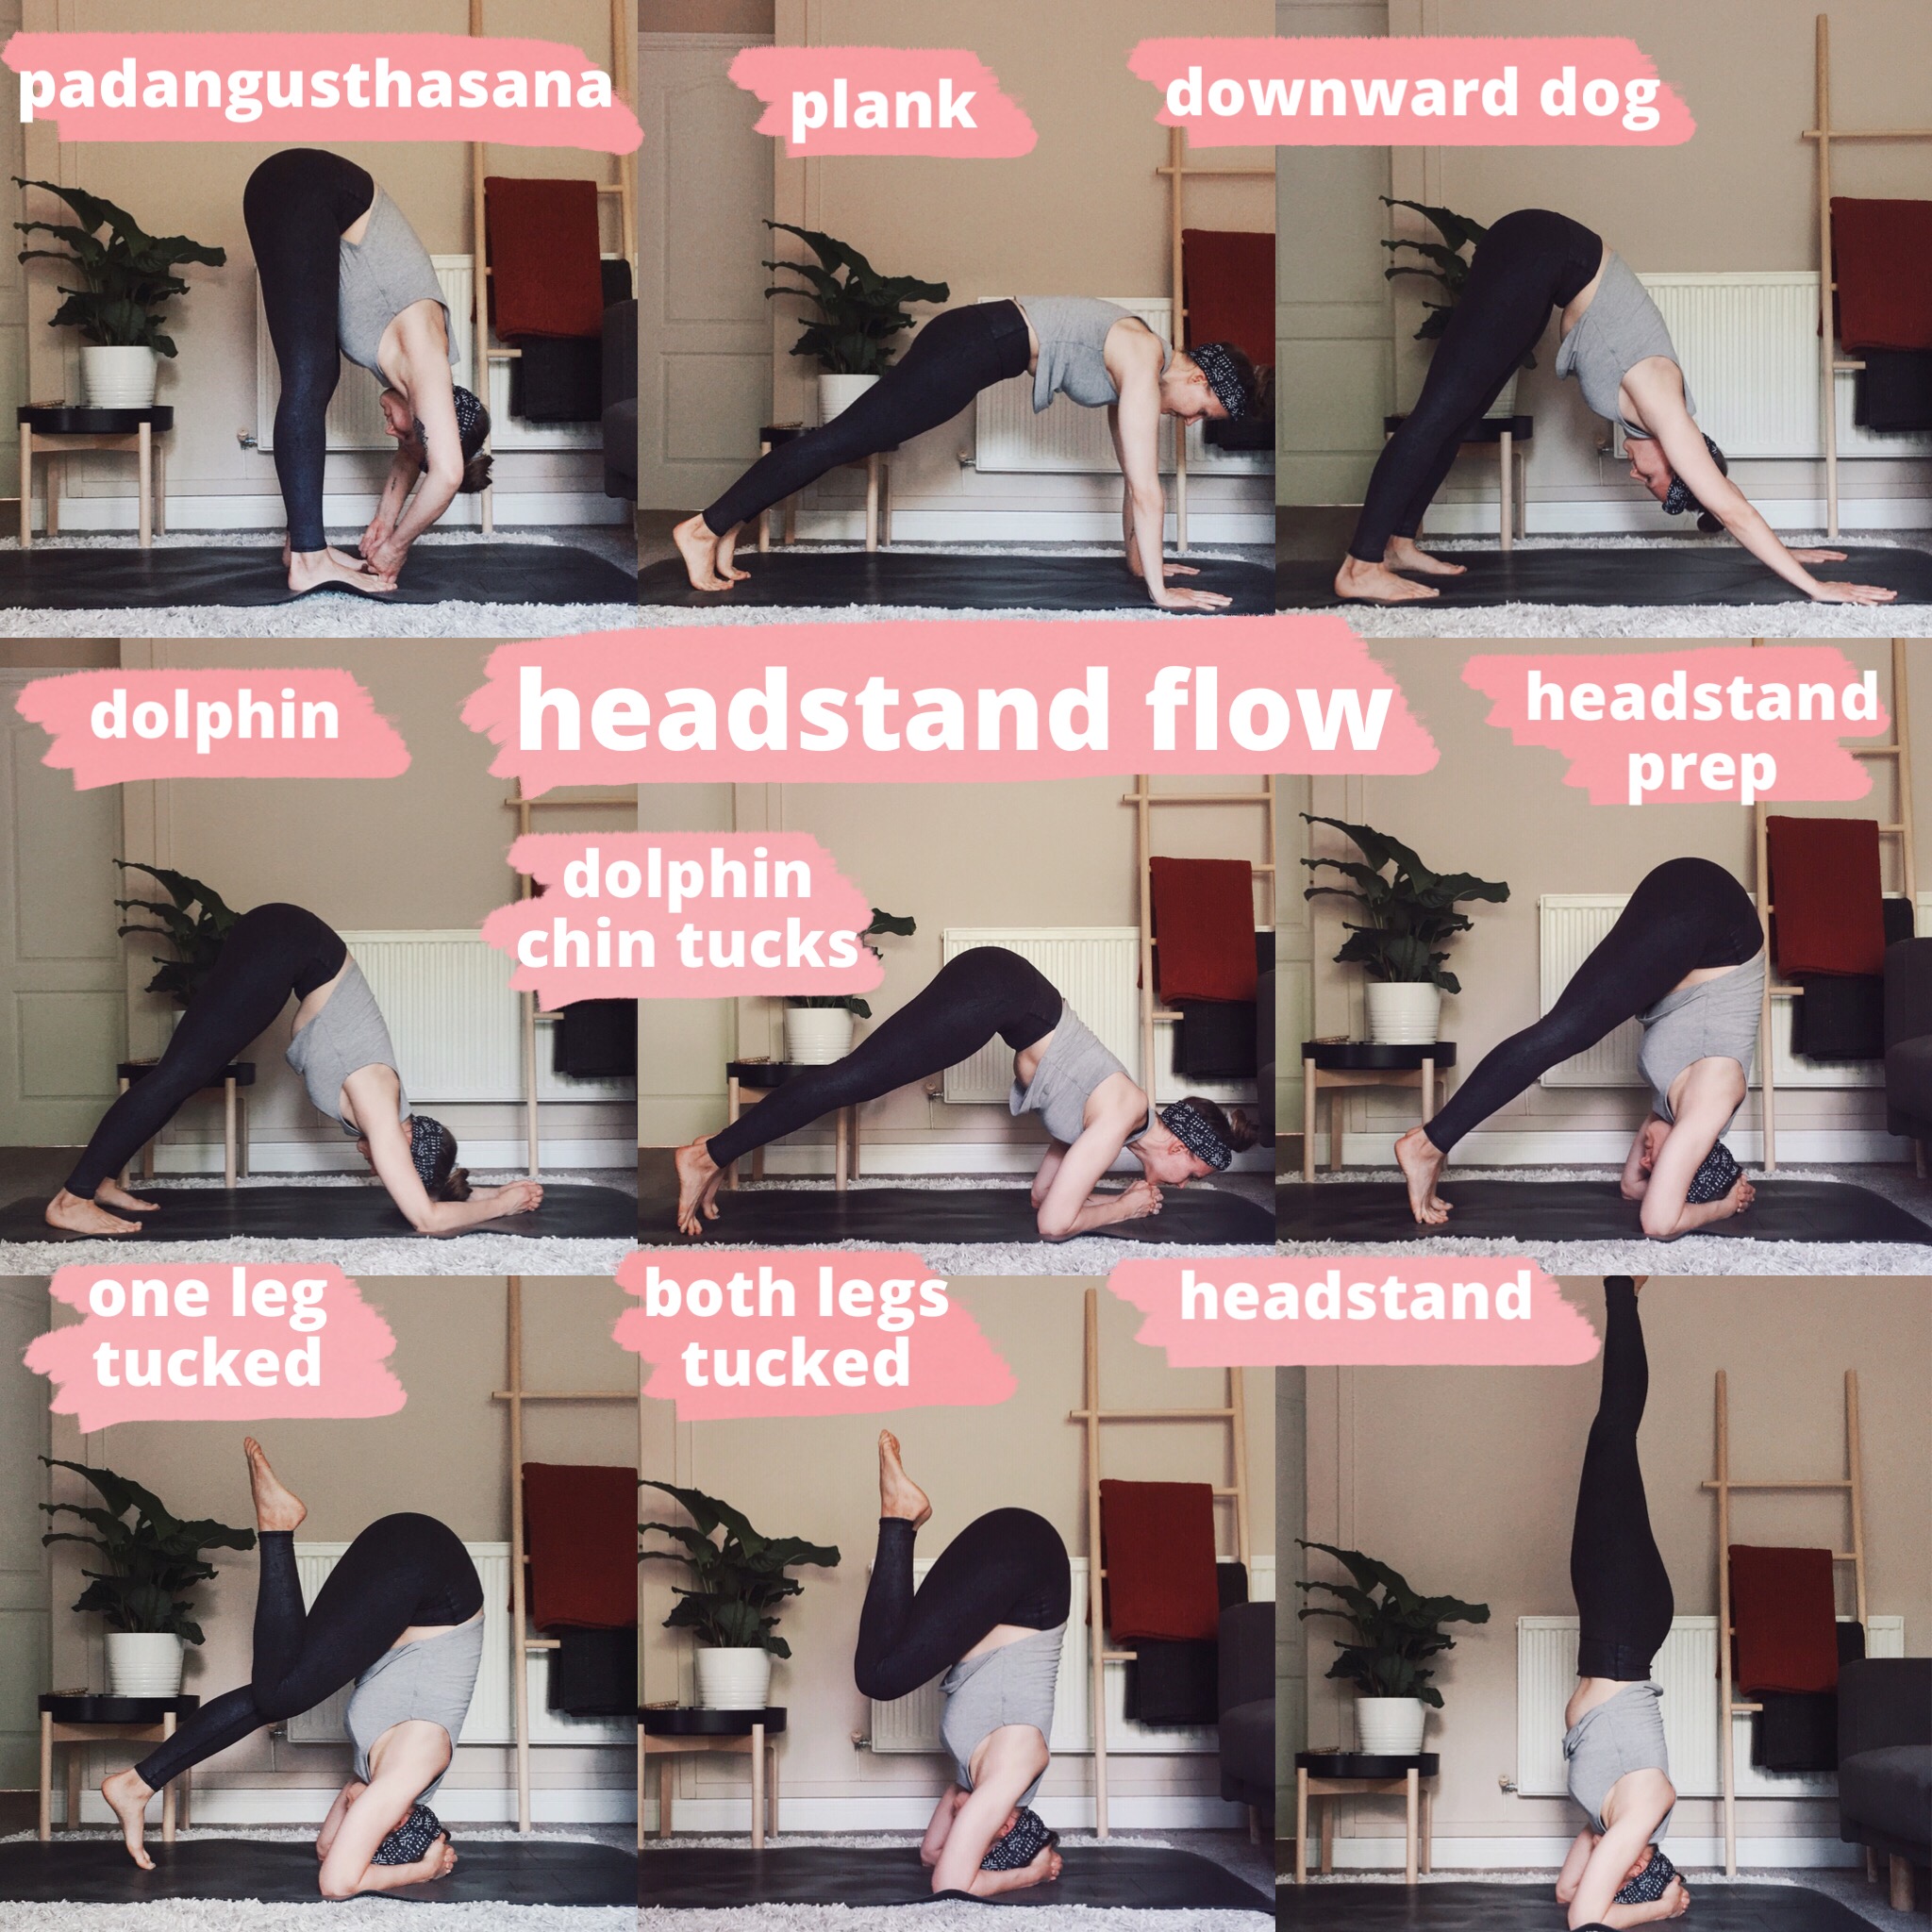 Headstand Flow - A few yoga poses to get you upside down